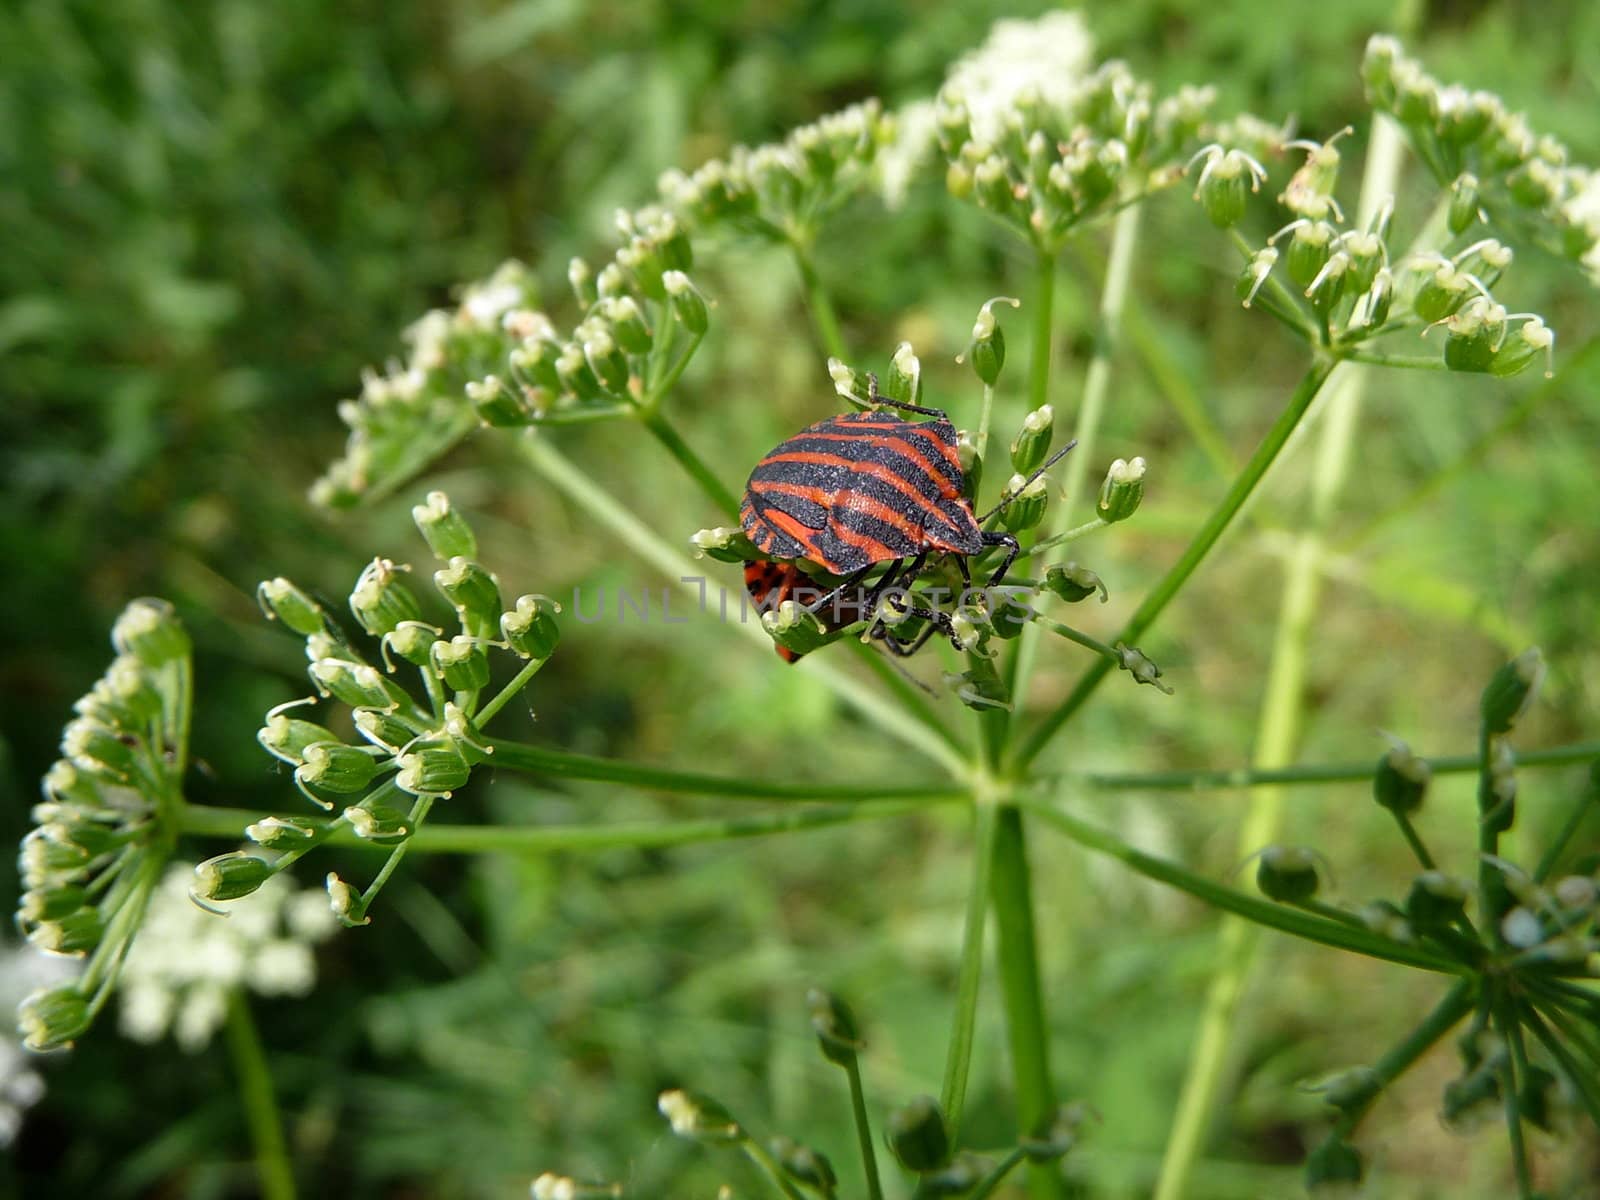 Striped colored forest bug on the plant